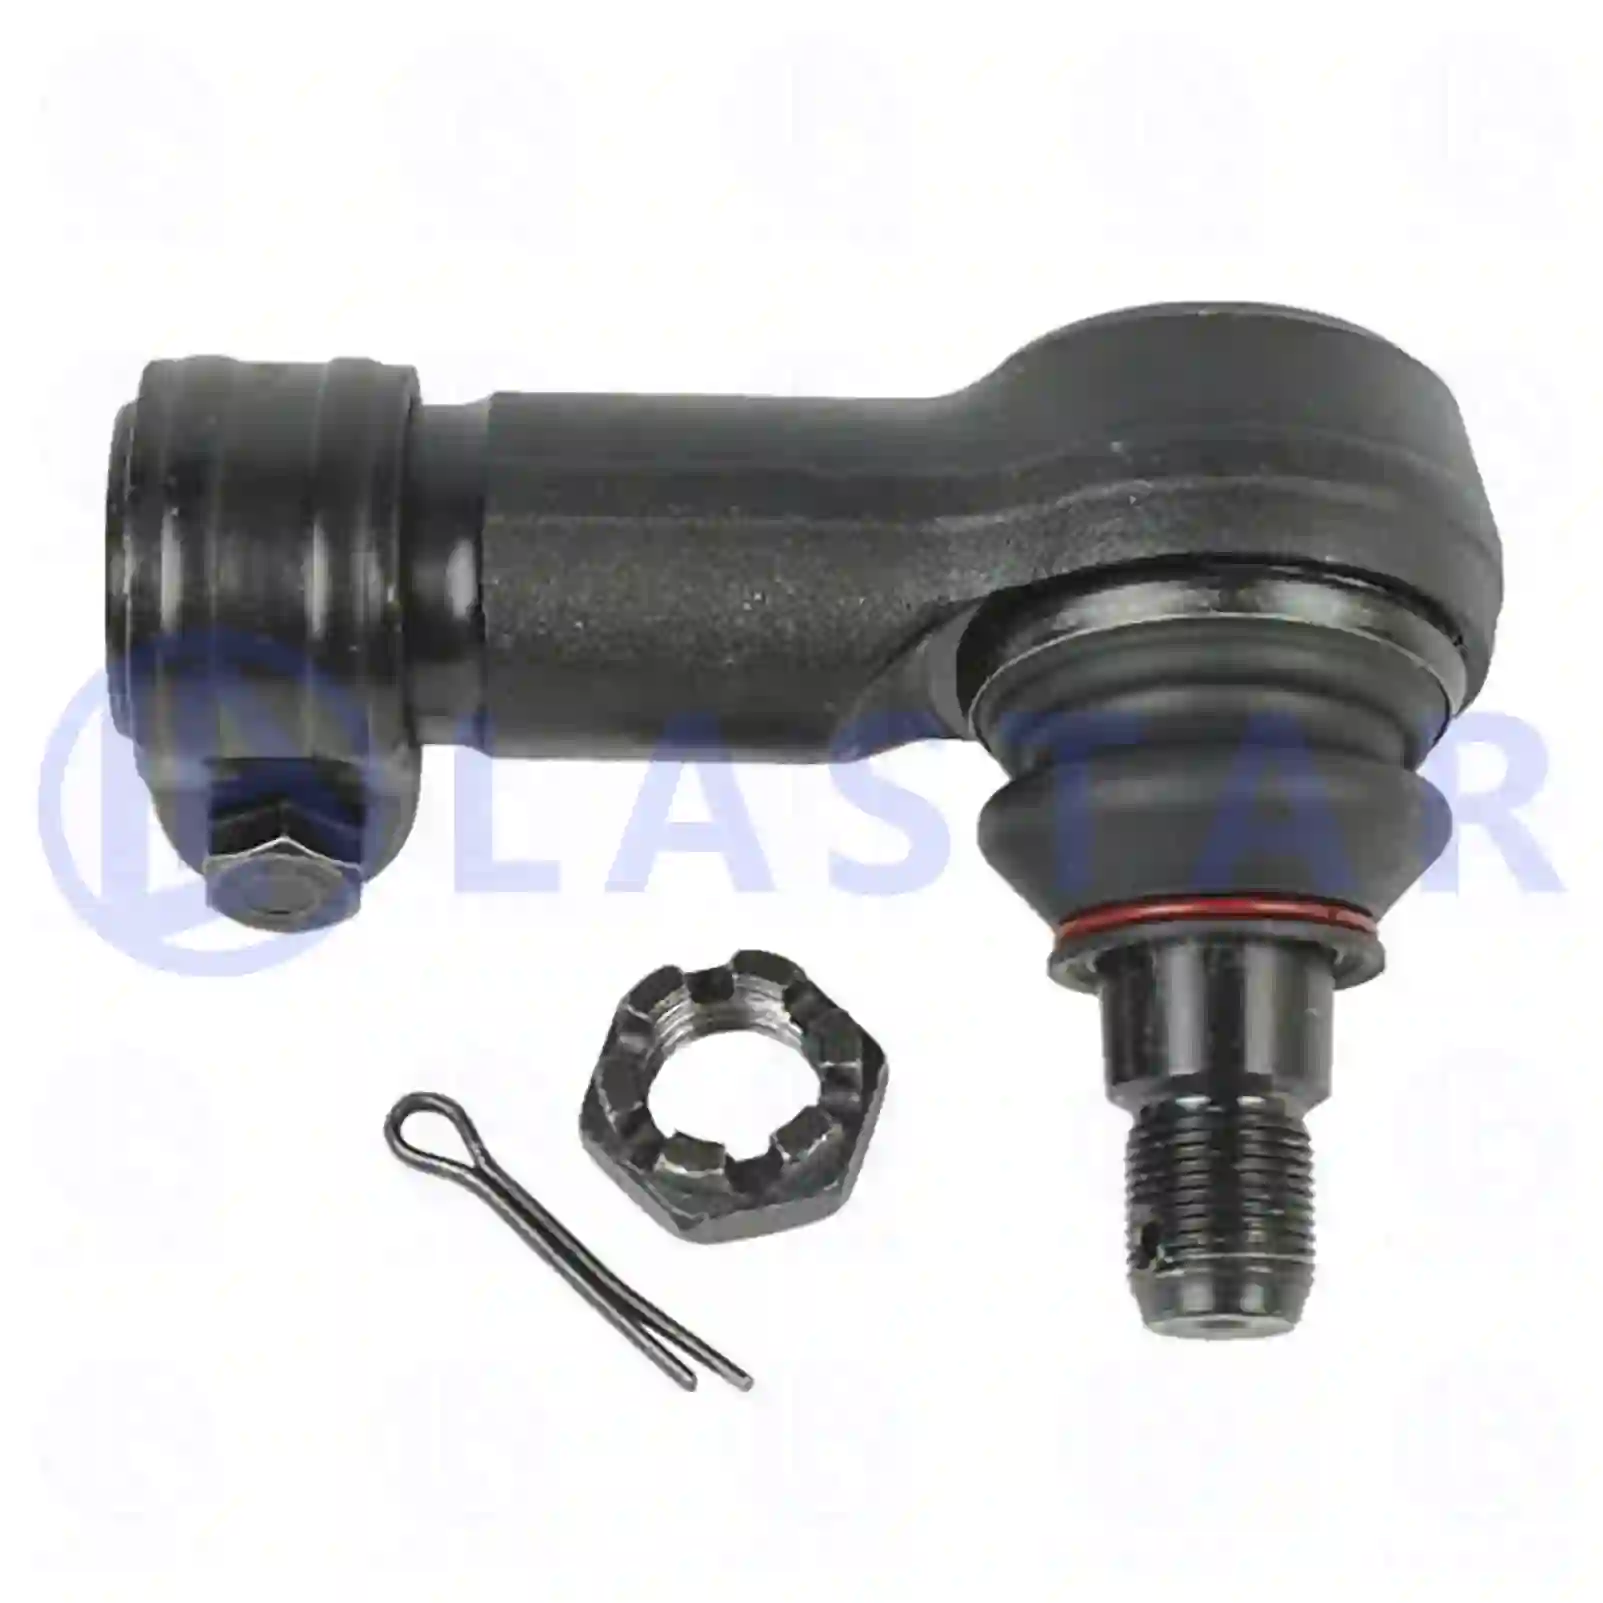 Ball joint, right hand thread, 77705973, 1394447, , , , , ||  77705973 Lastar Spare Part | Truck Spare Parts, Auotomotive Spare Parts Ball joint, right hand thread, 77705973, 1394447, , , , , ||  77705973 Lastar Spare Part | Truck Spare Parts, Auotomotive Spare Parts